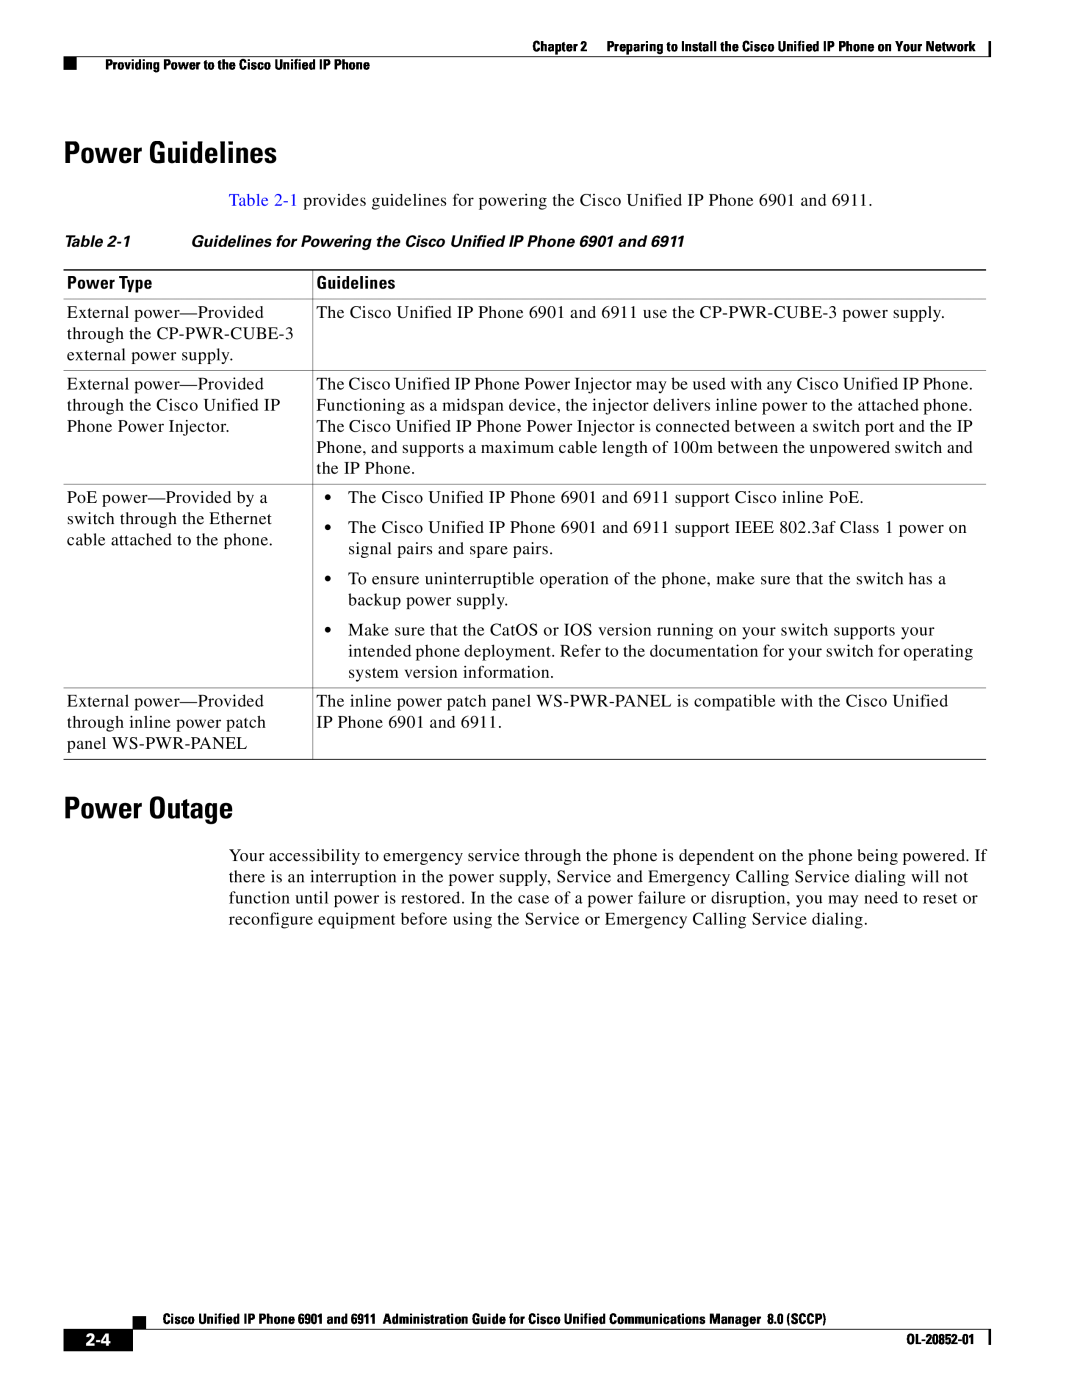 Cisco Systems 691 manual Power Guidelines, Power Outage, Power Type 